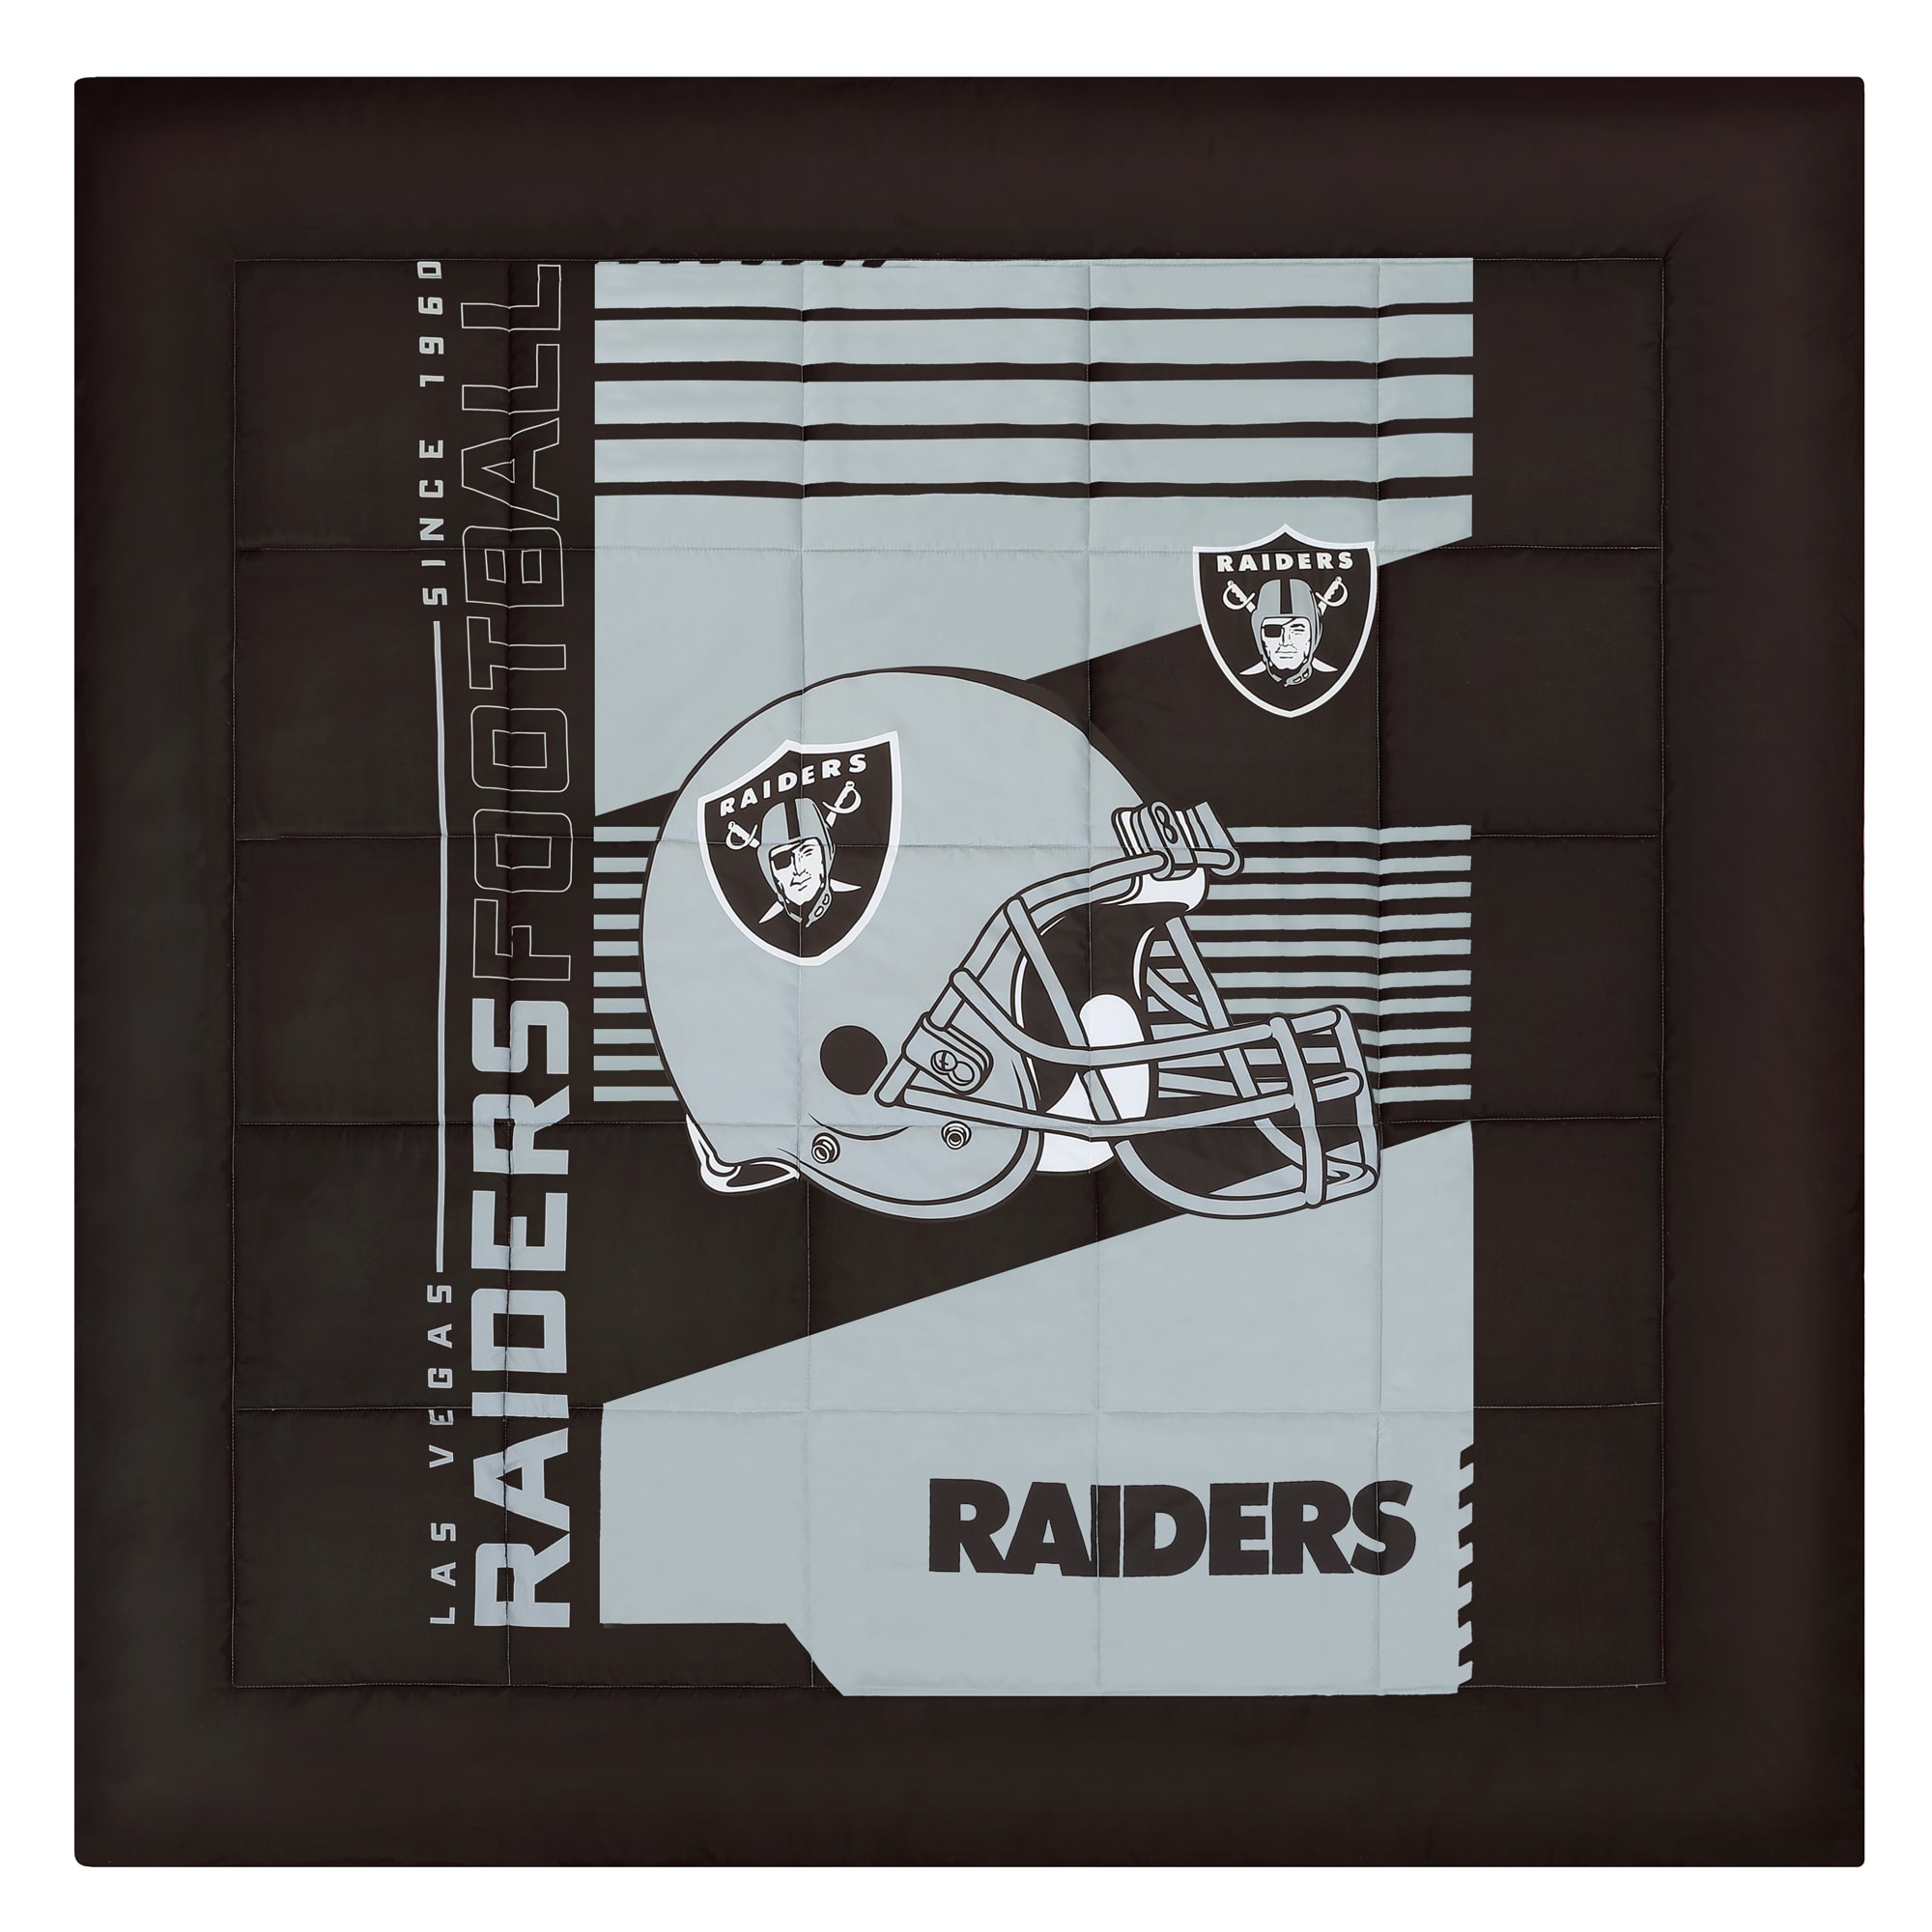 Cathay Sports Las Vegas Raiders 4-Piece Silver/Black Twin/Twin Xl Bundle Set  in the Bedding Sets department at